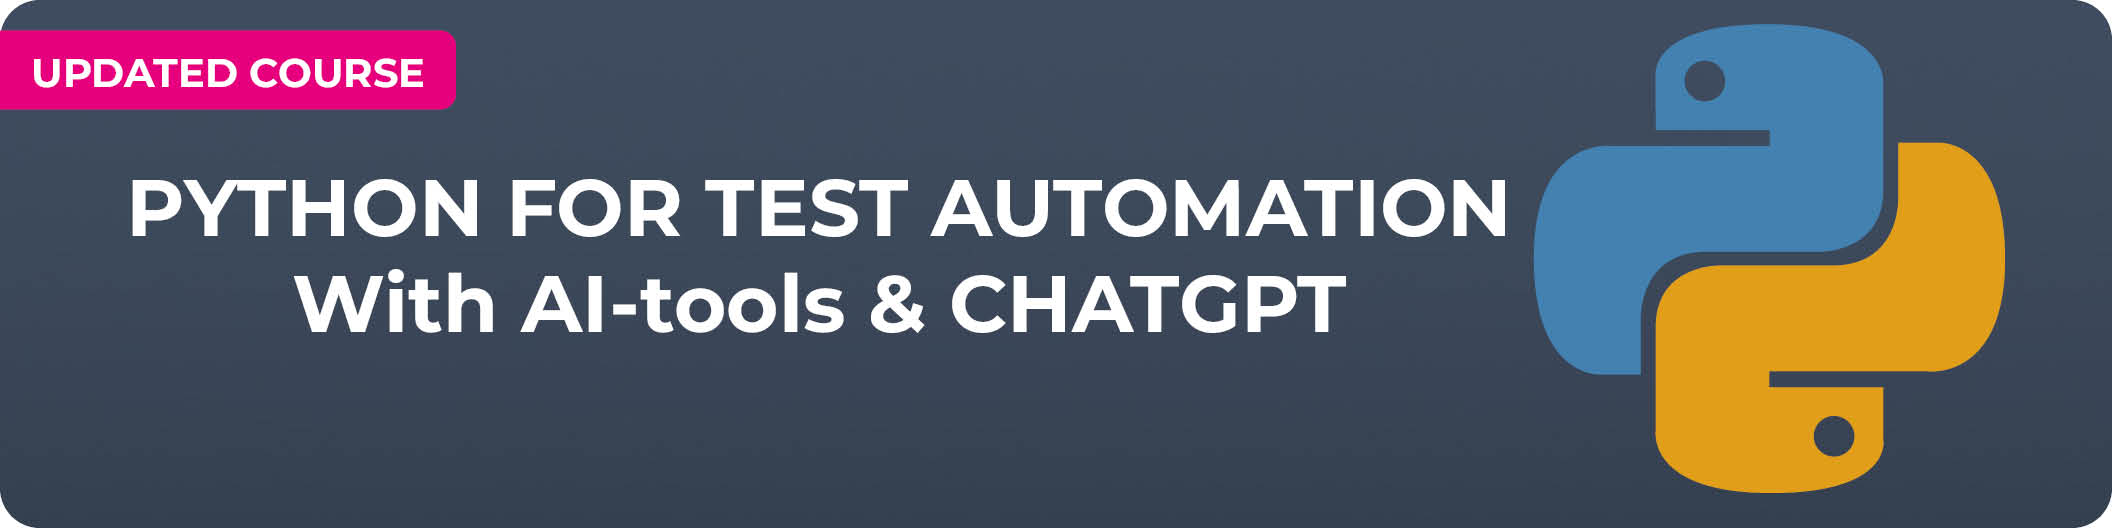 PYTHON FOR TEST AUTOMATION WITH AI-TOOLS & CHATGPT